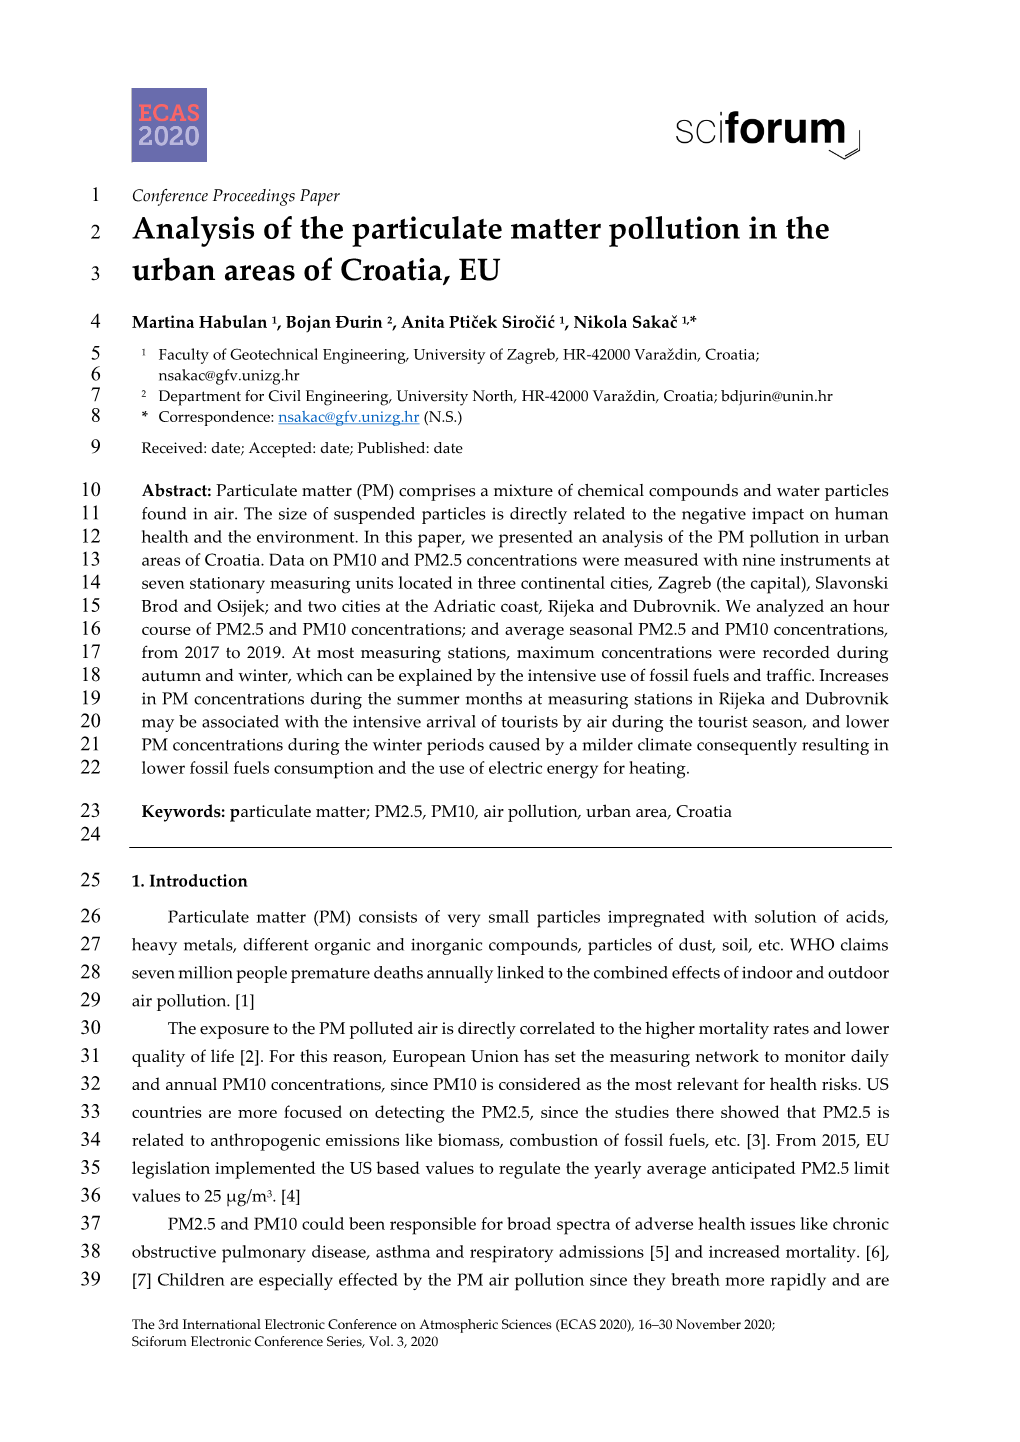 Analysis of the Particulate Matter Pollution in the Urban Areas Of